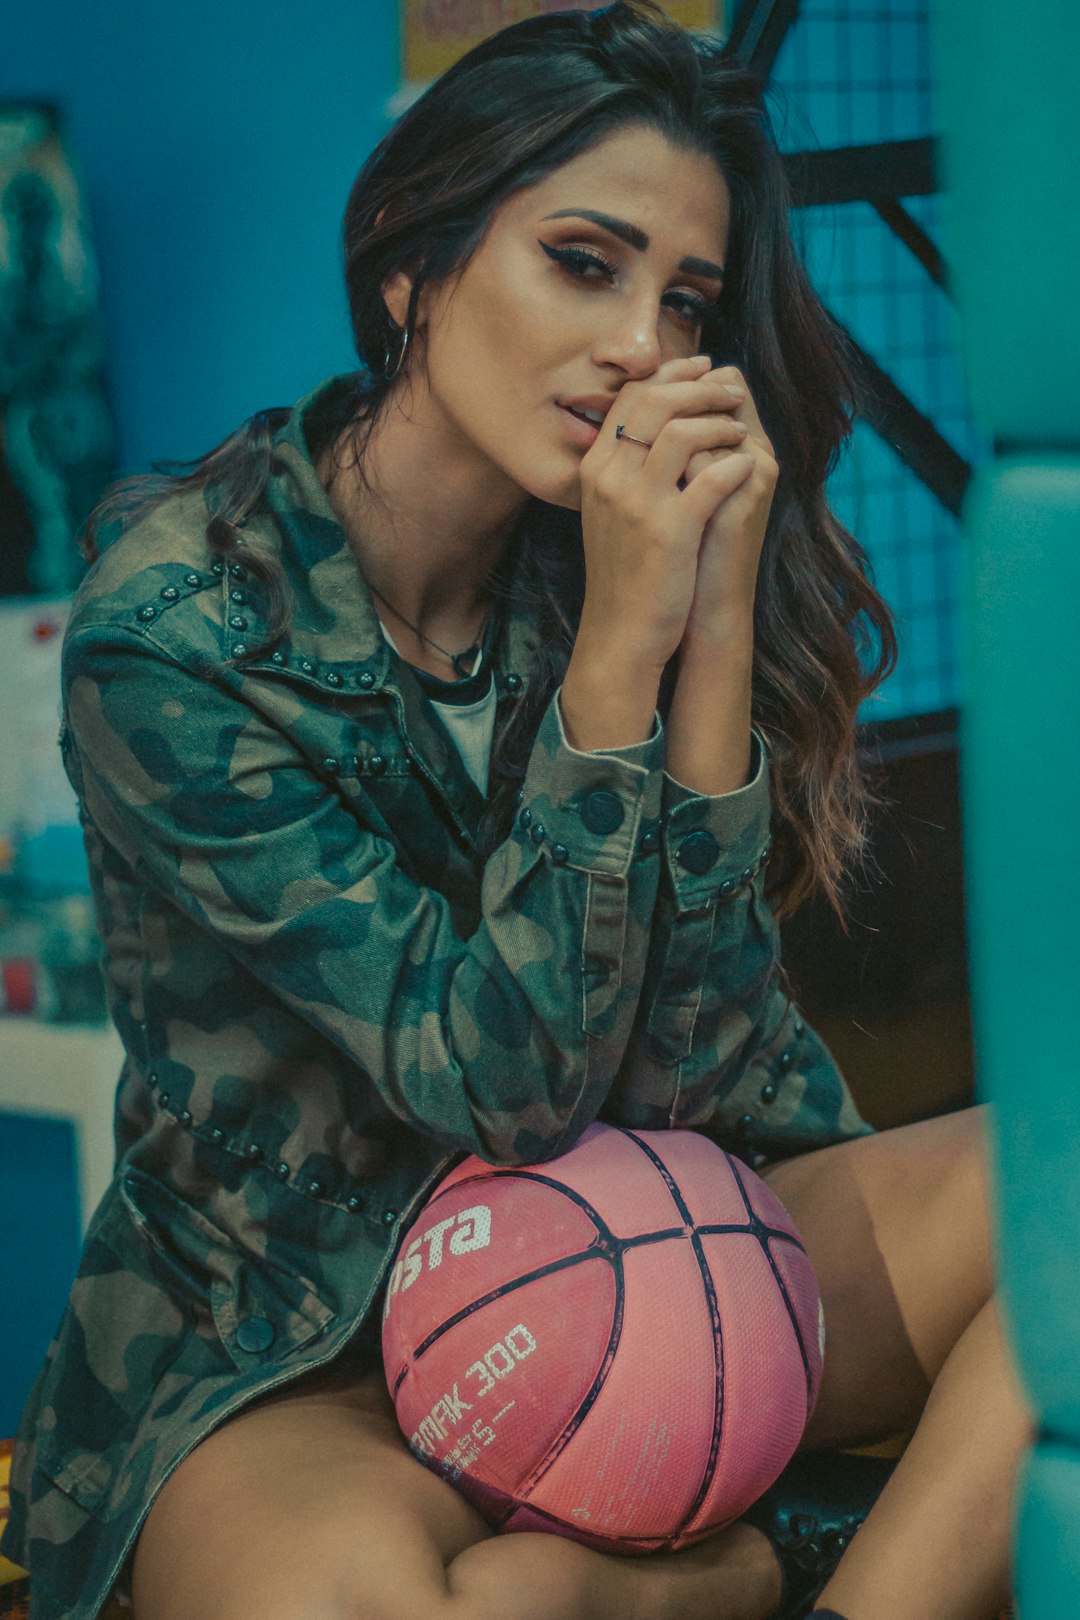 woman wearing camouflage jacket leaning her elbow on basketball on lap